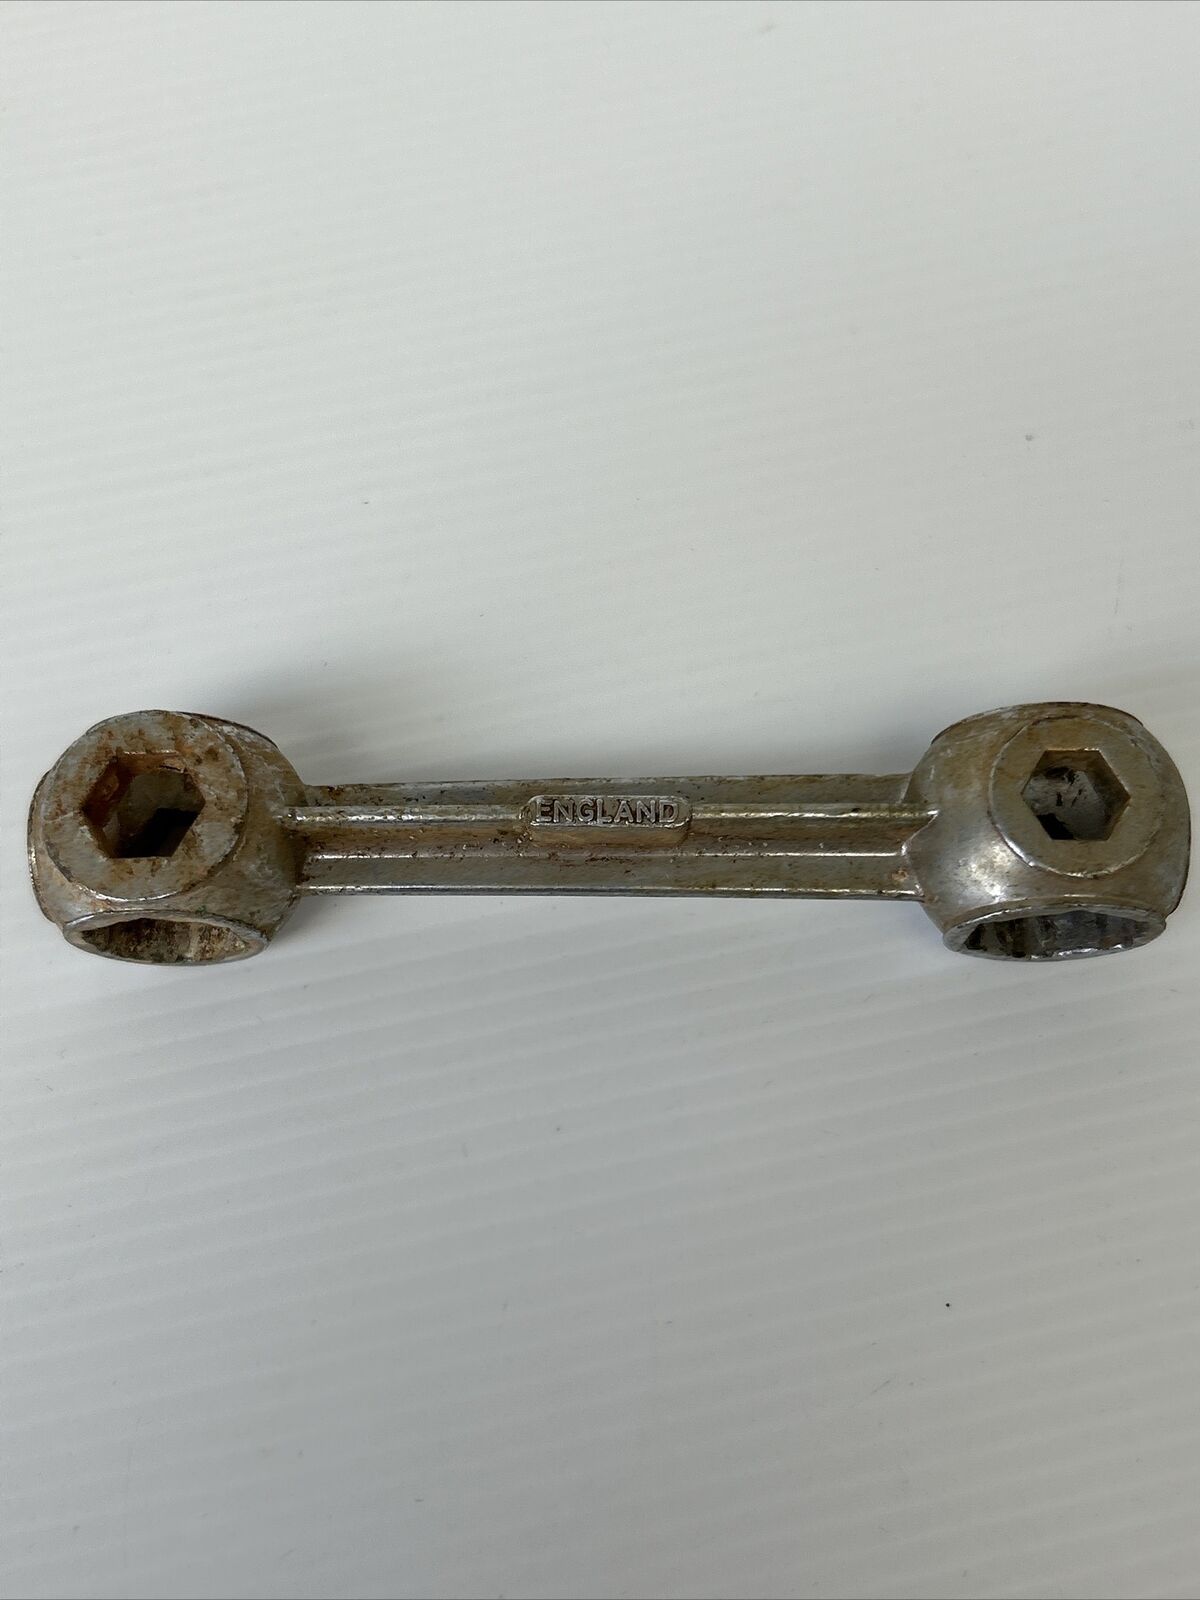 Vintage 10-in-1 Dog Bone Hex Nut Bicycle Wrench Made in England